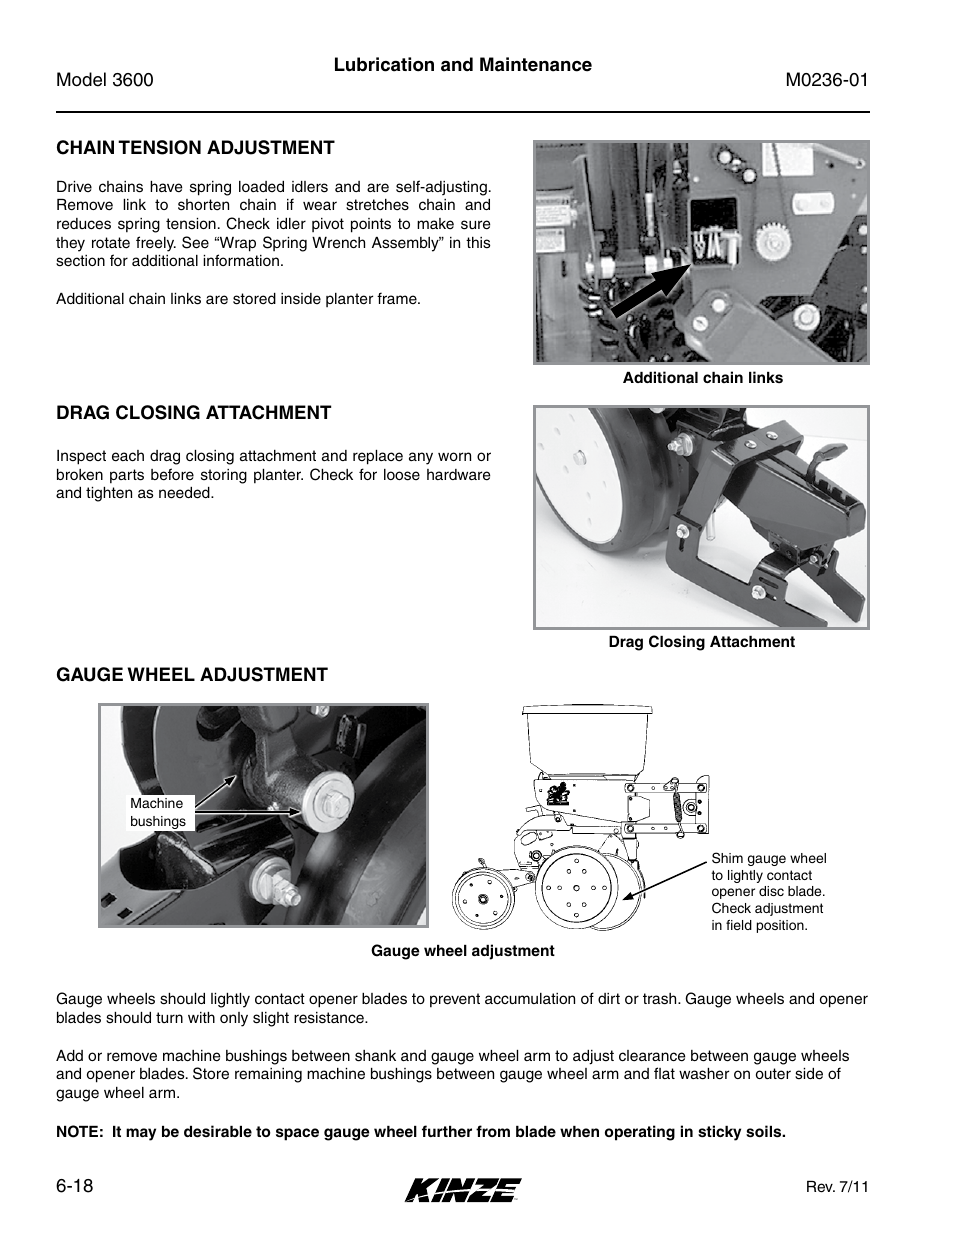 Chain tension adjustment, Drag closing attachment, Gauge wheel adjustment | Chain tension adjustment -18, Drag closing attachment -18, Gauge wheel adjustment -18 | Kinze 3600 Lift and Rotate Planter Rev. 7/14 User Manual | Page 126 / 172